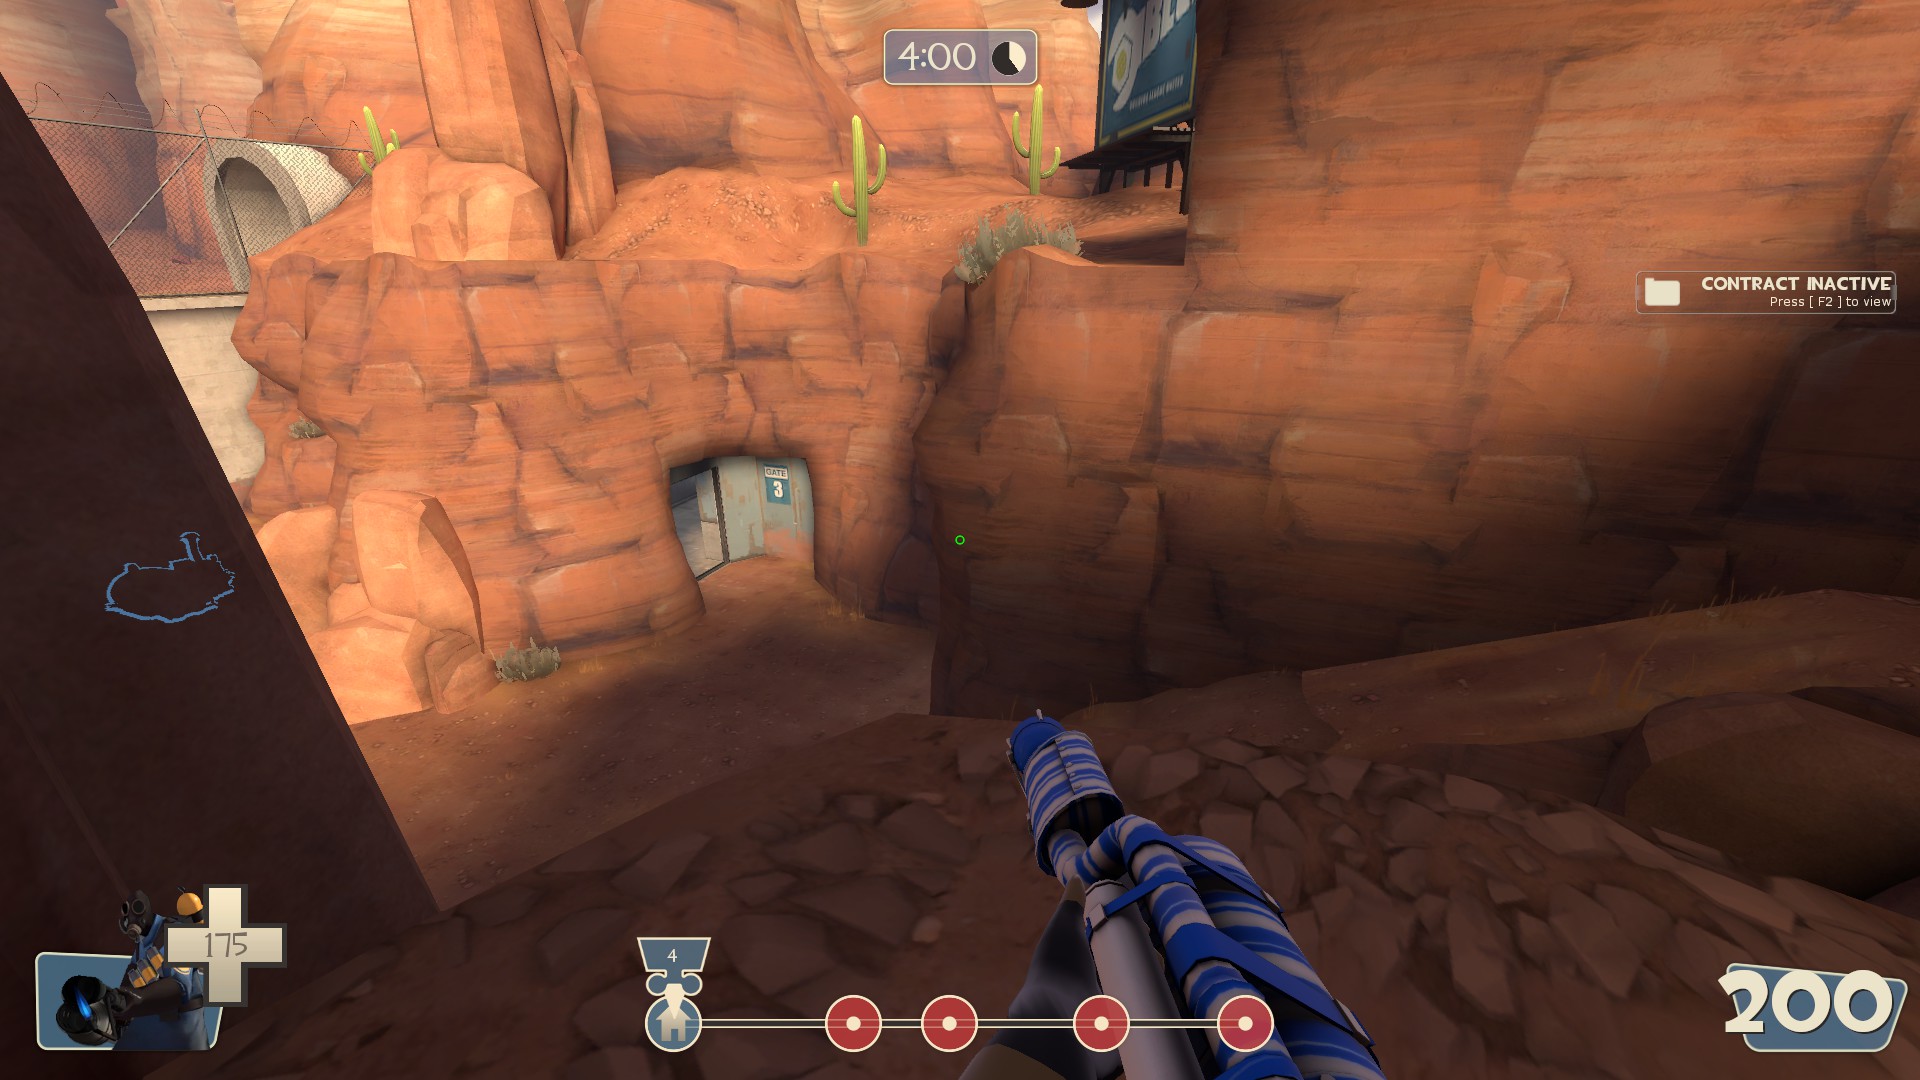 Team Fortress 2 Airblast Best Spots to Hide - Badwater Basin Location(s) - 7352933